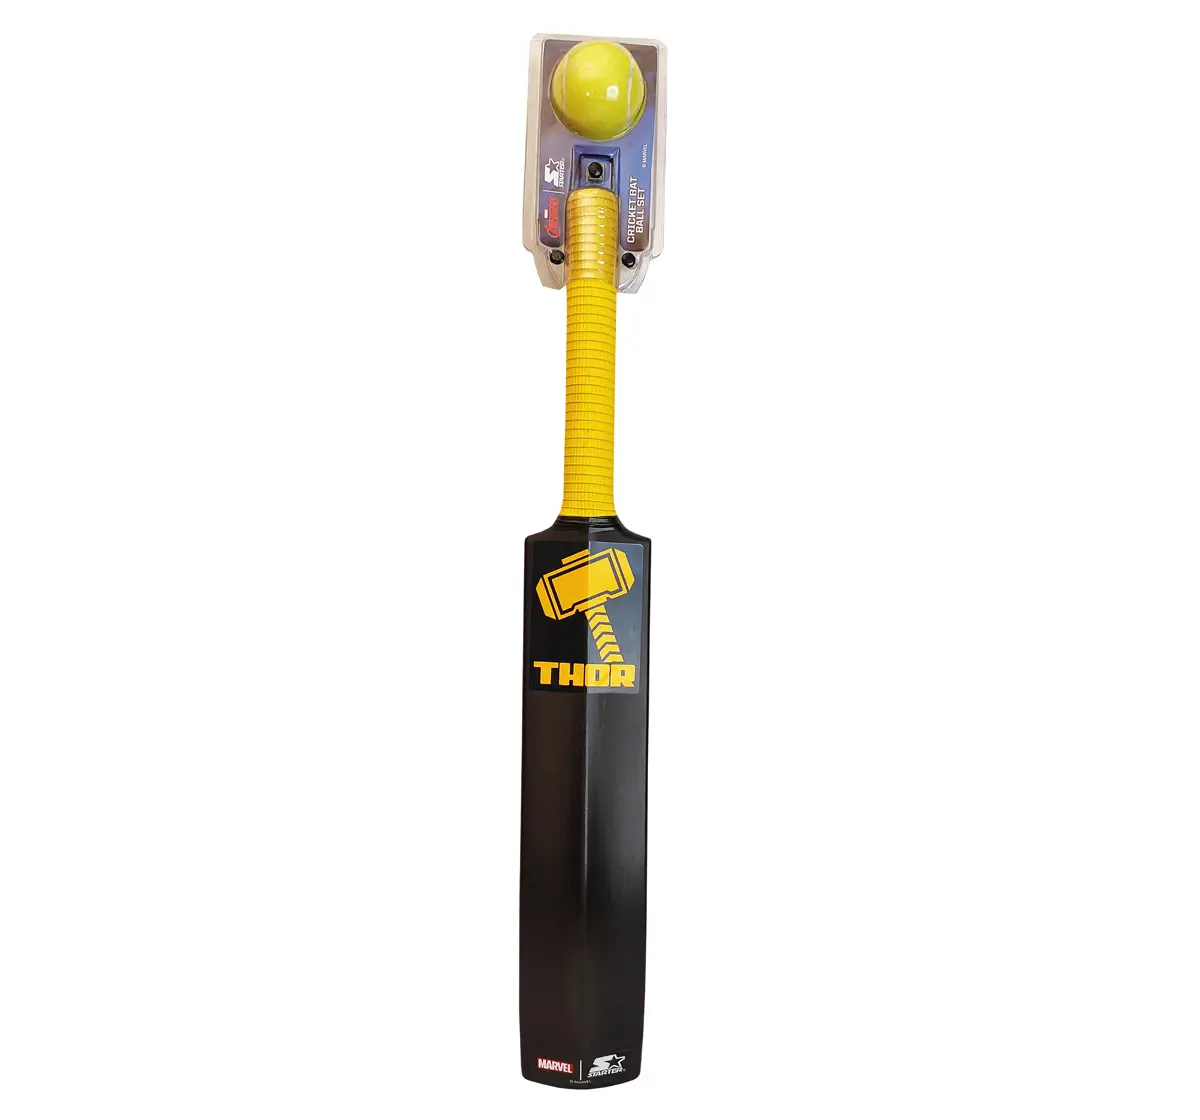 Starter Thor Cricket Bat And Ball Set Size 1 Multicolour, 3Y+